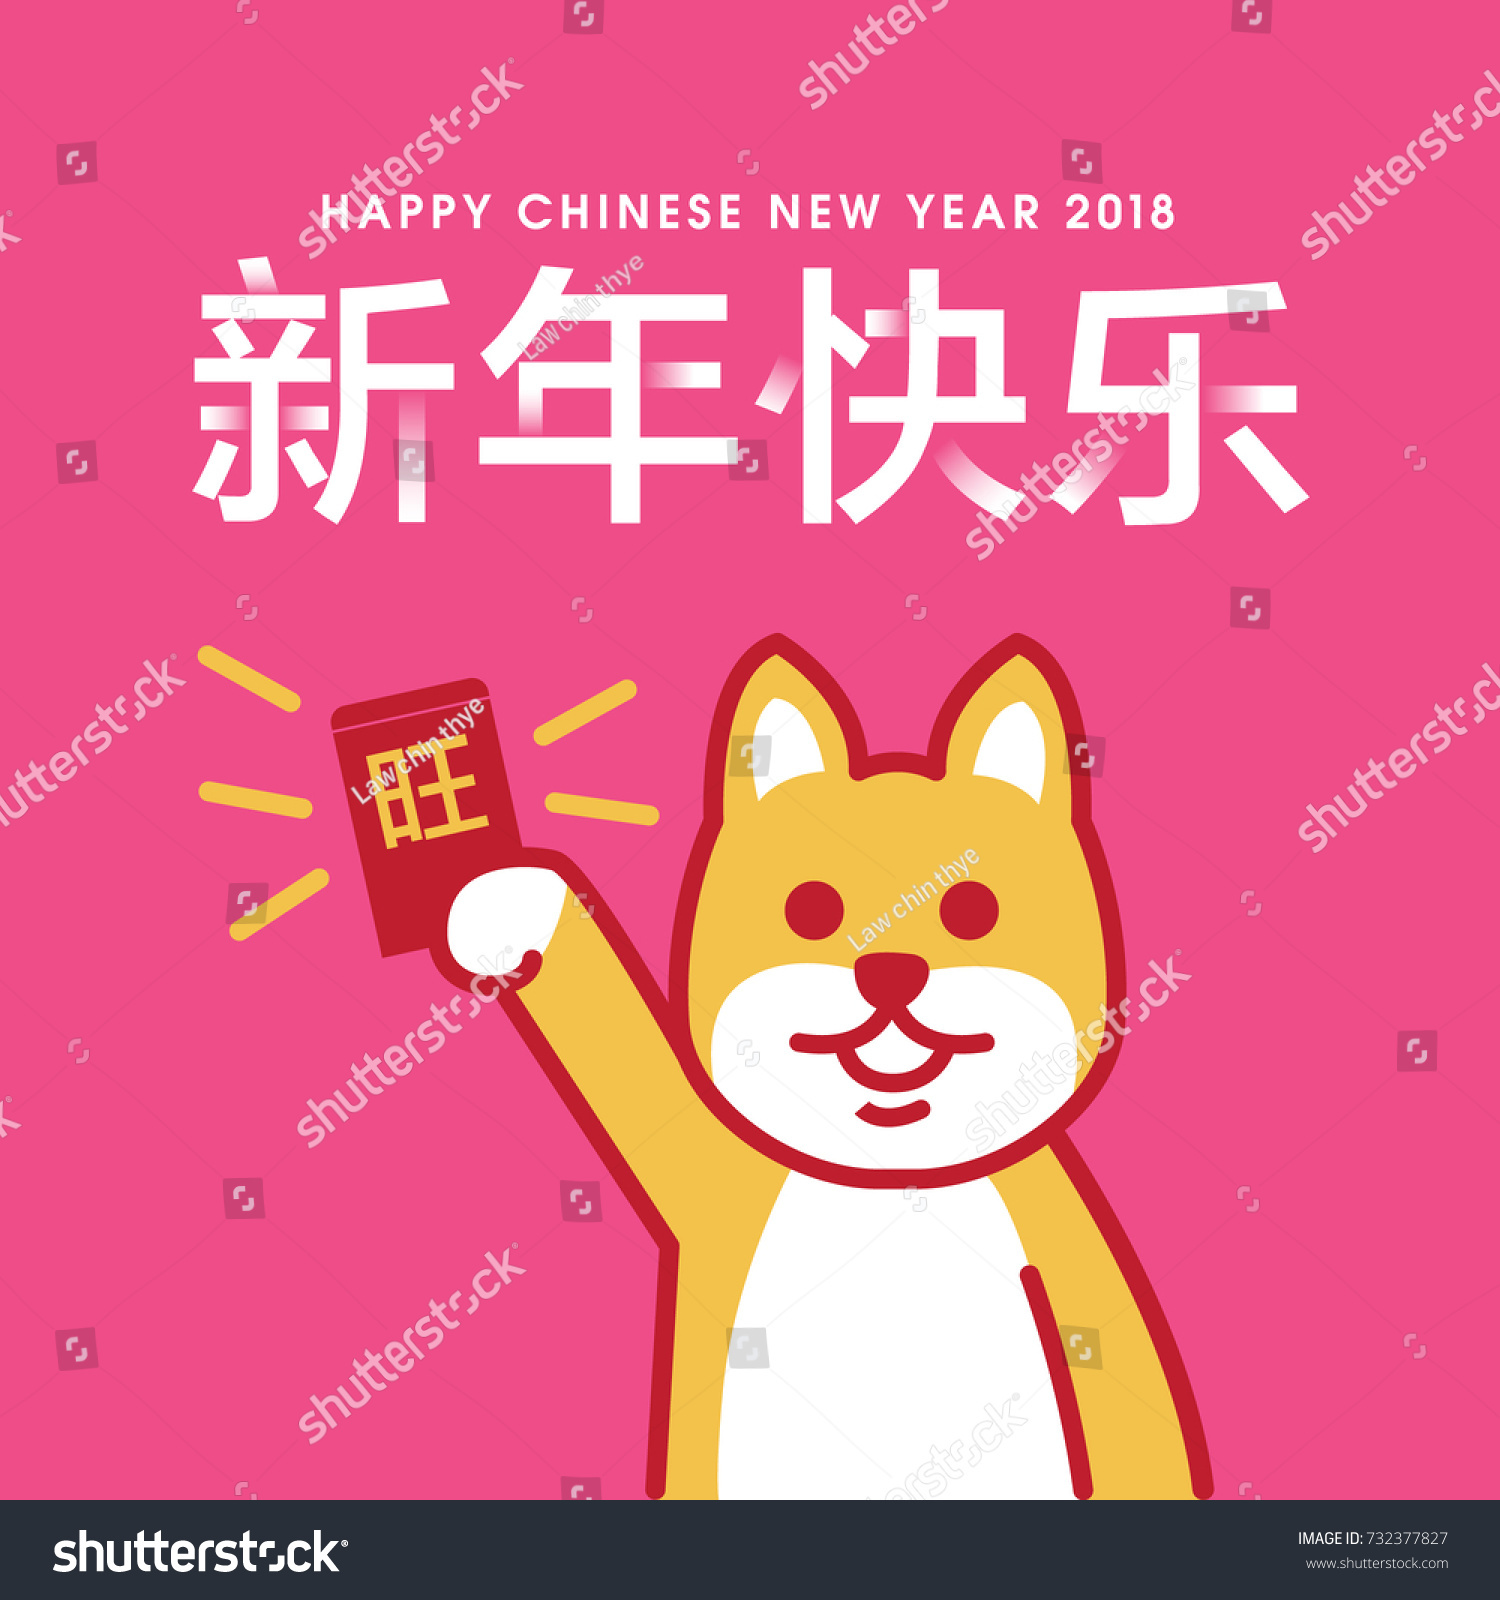 Https Image Shutterstock Com Z Stock Vector Chinese New Year Of Dog Chinese Translation Wishing You Happy I Happy Chinese New Year Chinese New Year Dog Years